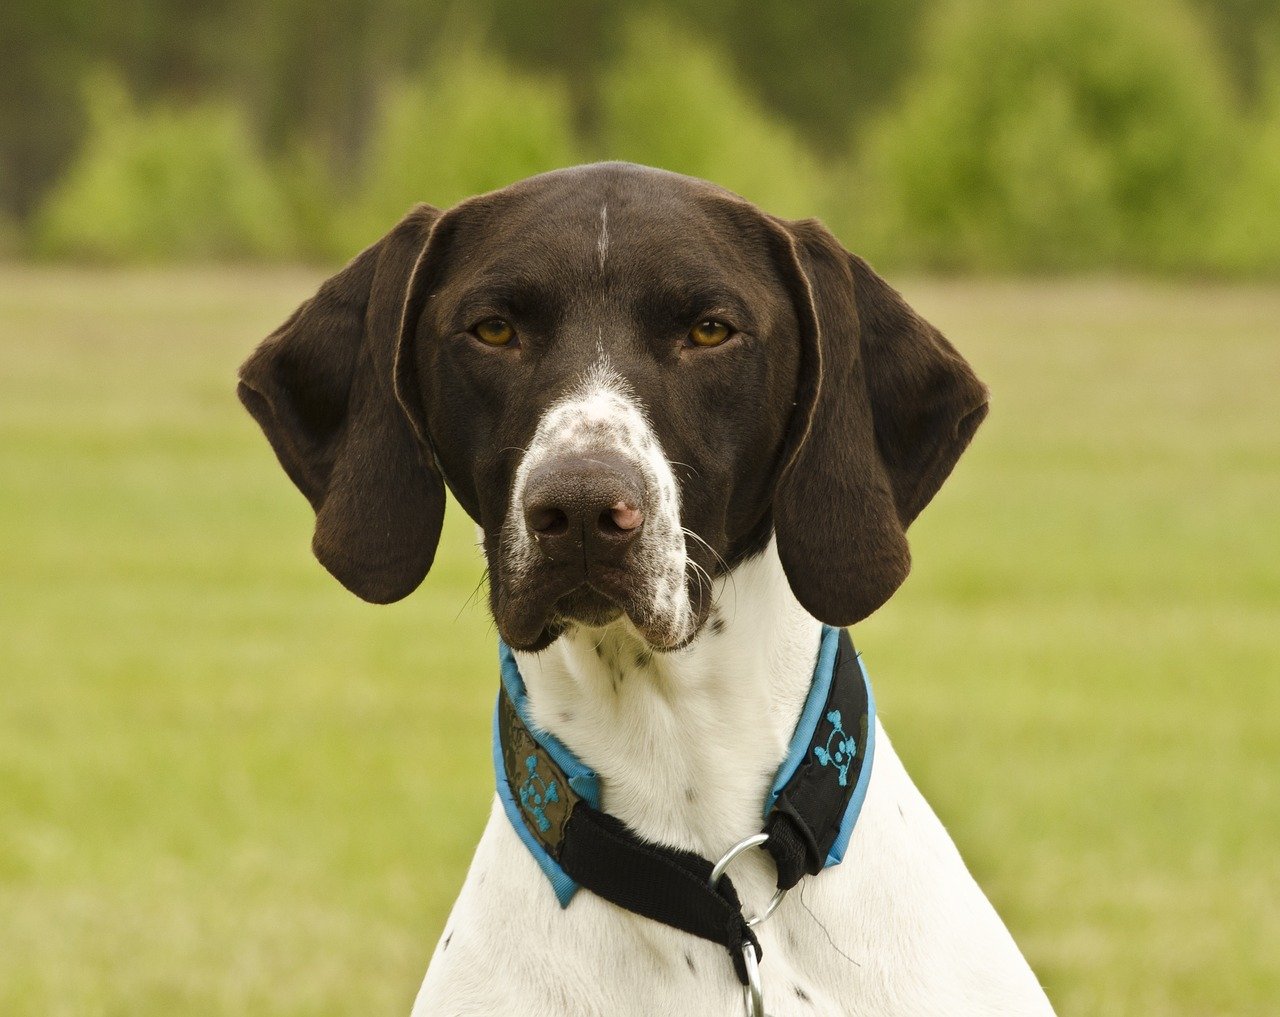 German Shorthaired Pointer: The overall great dog